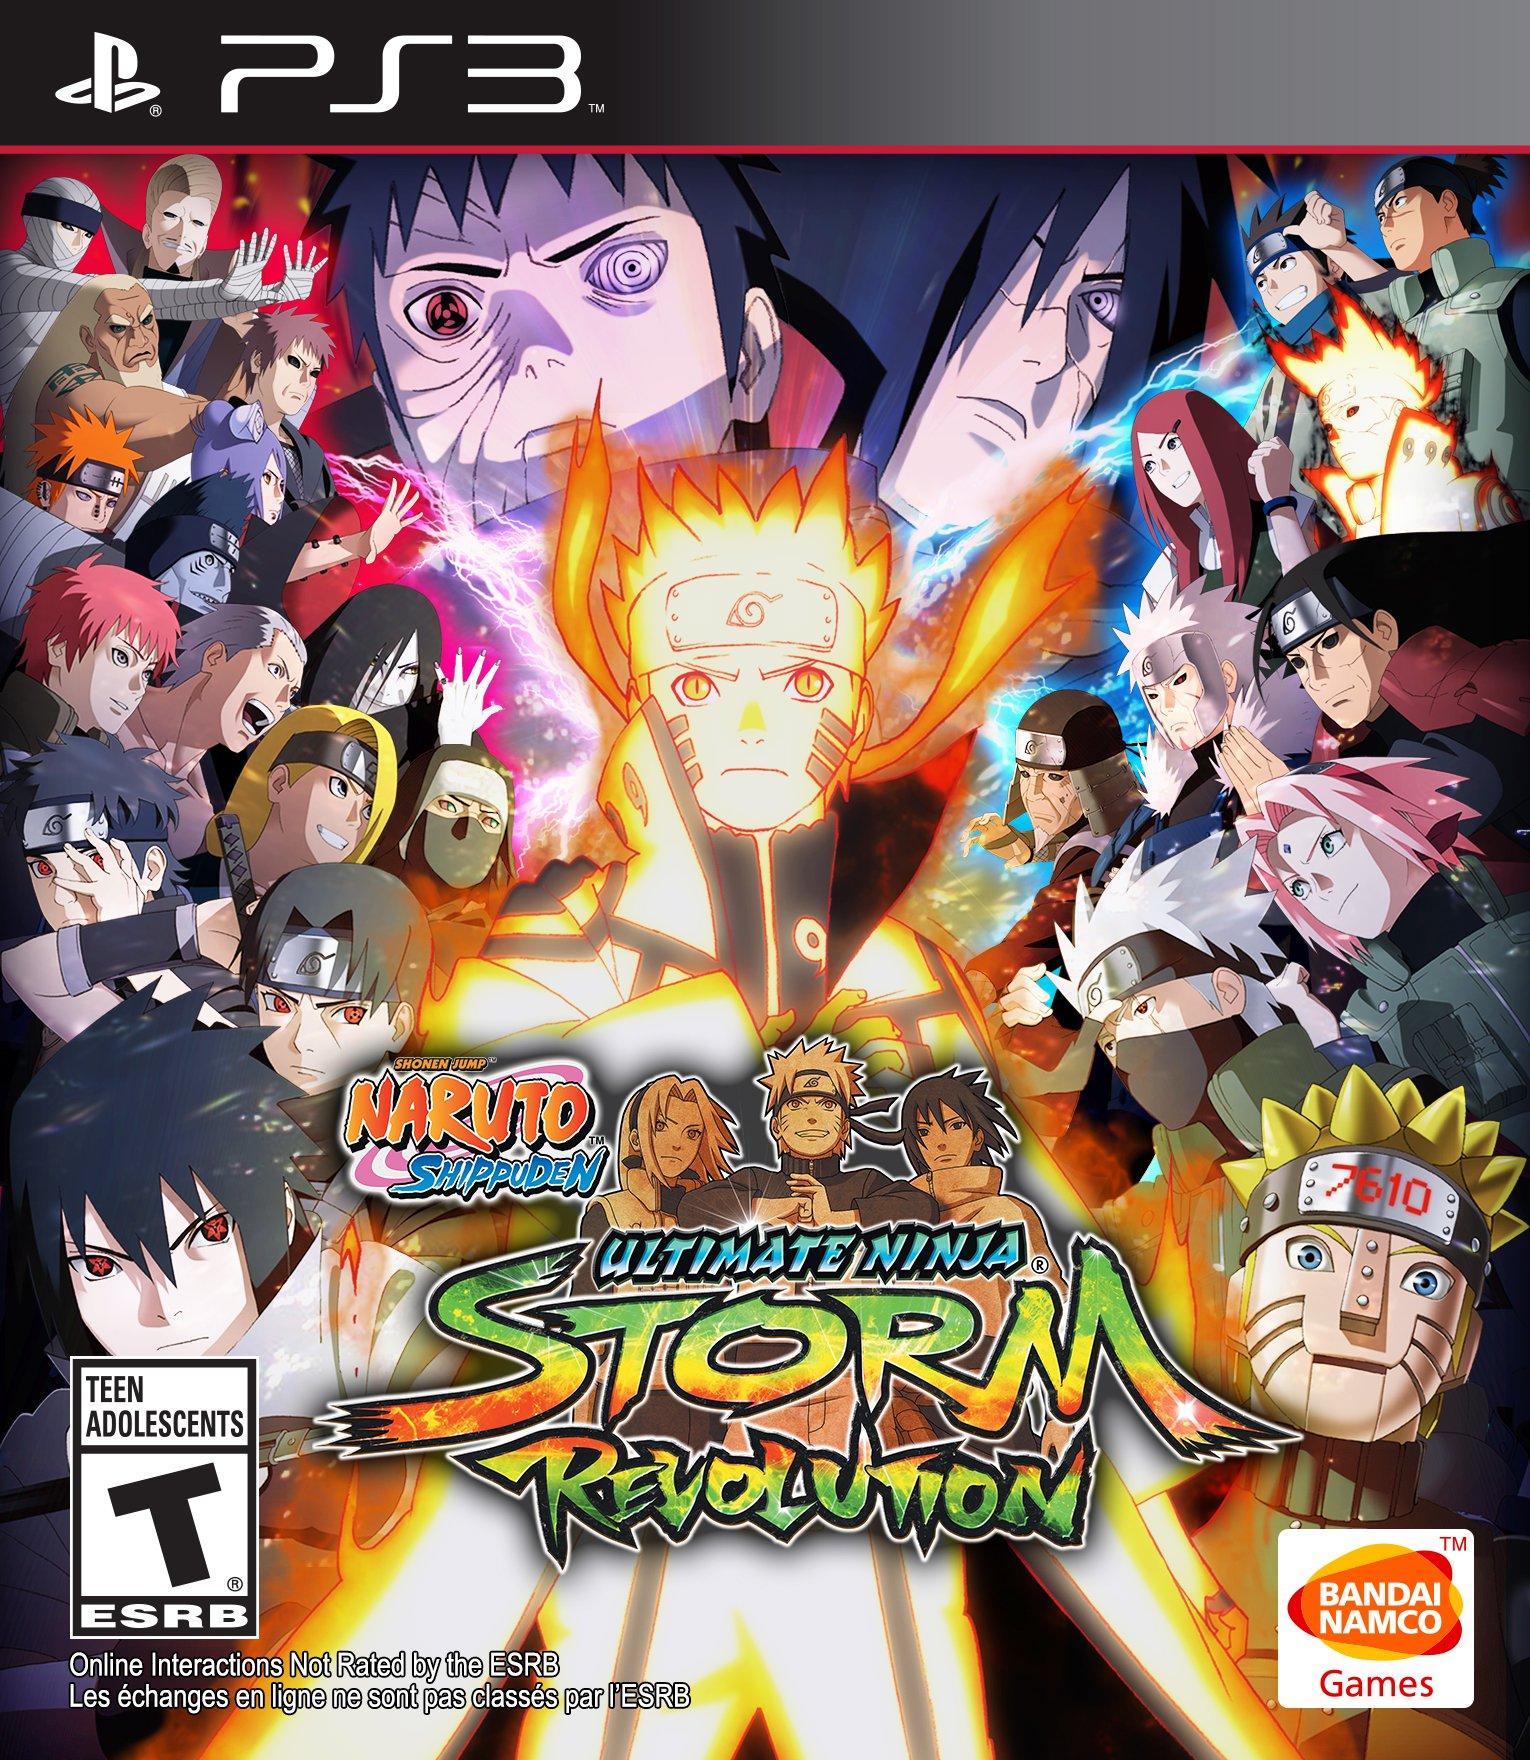  Third Party - Naruto Shippuden Ultimate: Ninja Storm 4 - Road  to Boruto Occasion [ PS4 ] - 3391891991292 : Video Games